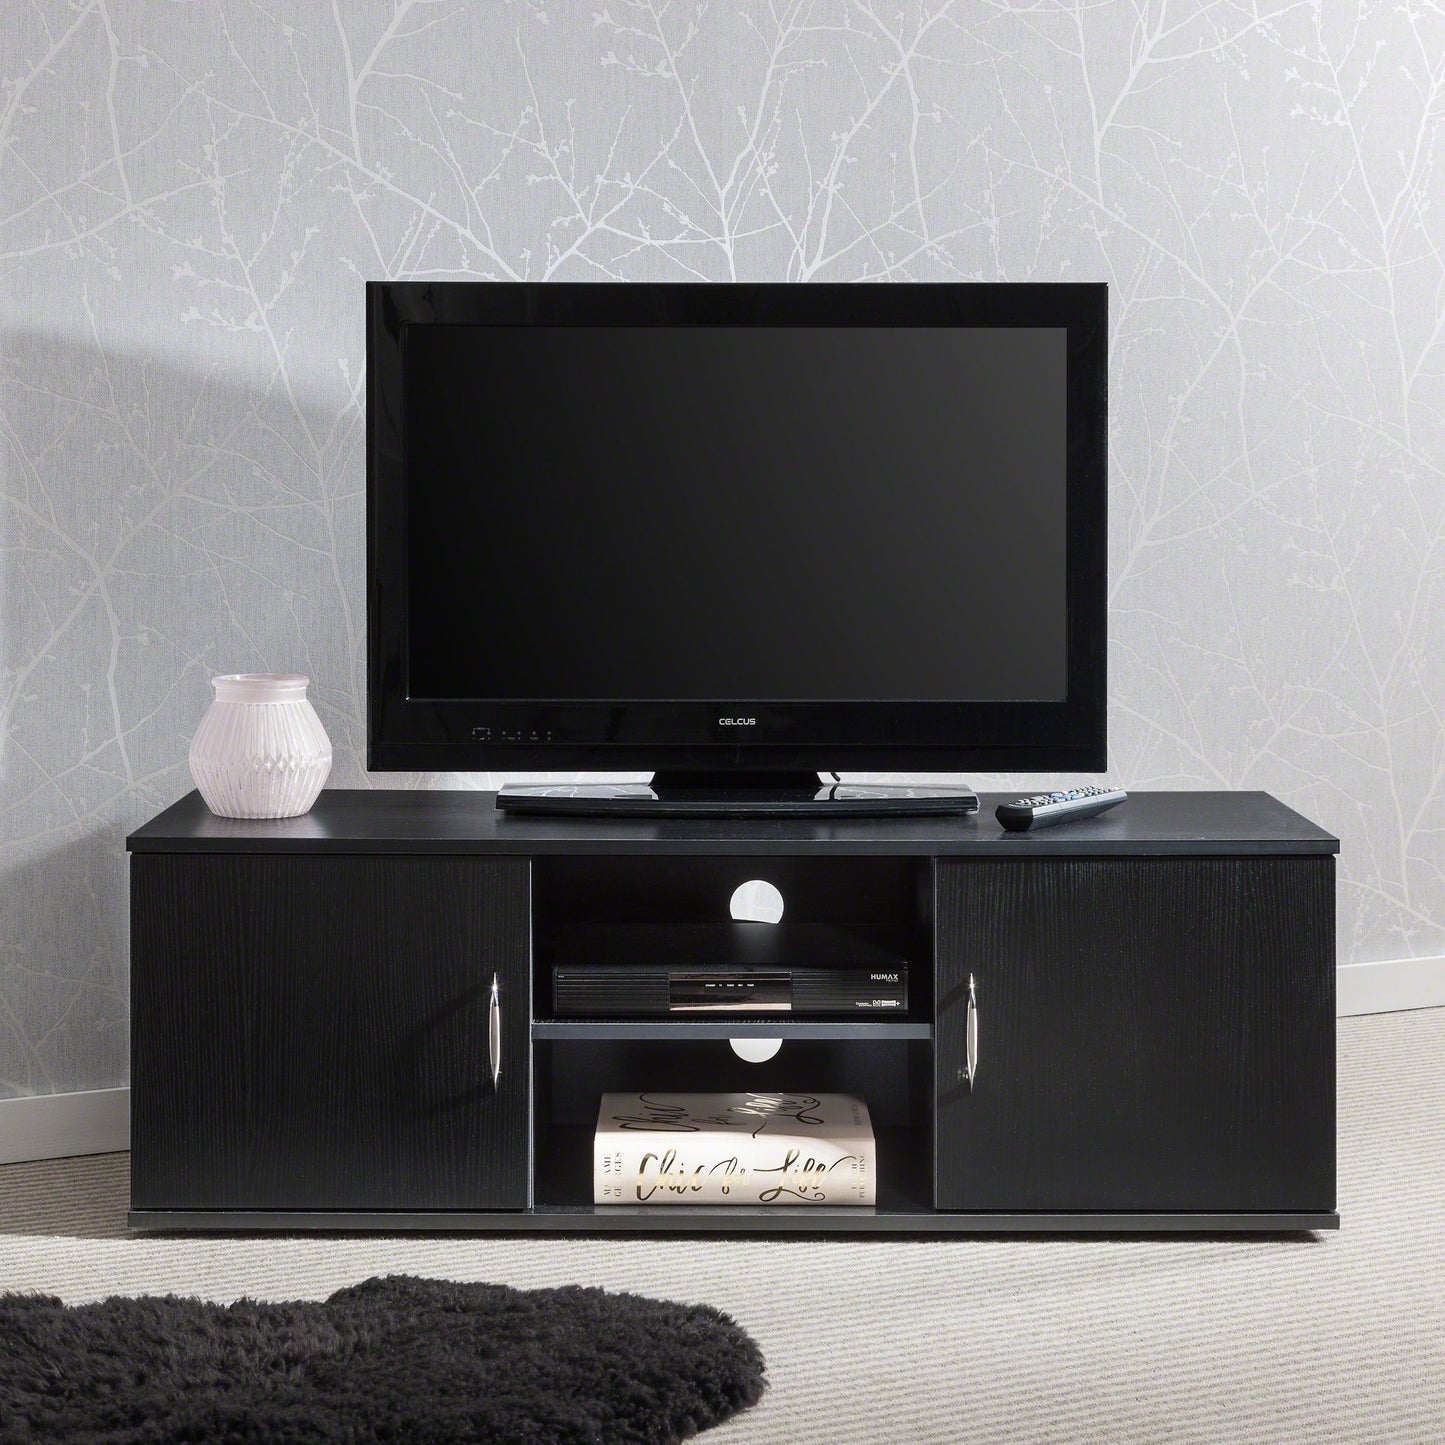 Black TV Unit with Storage and Shelf - Laura James - Laura James